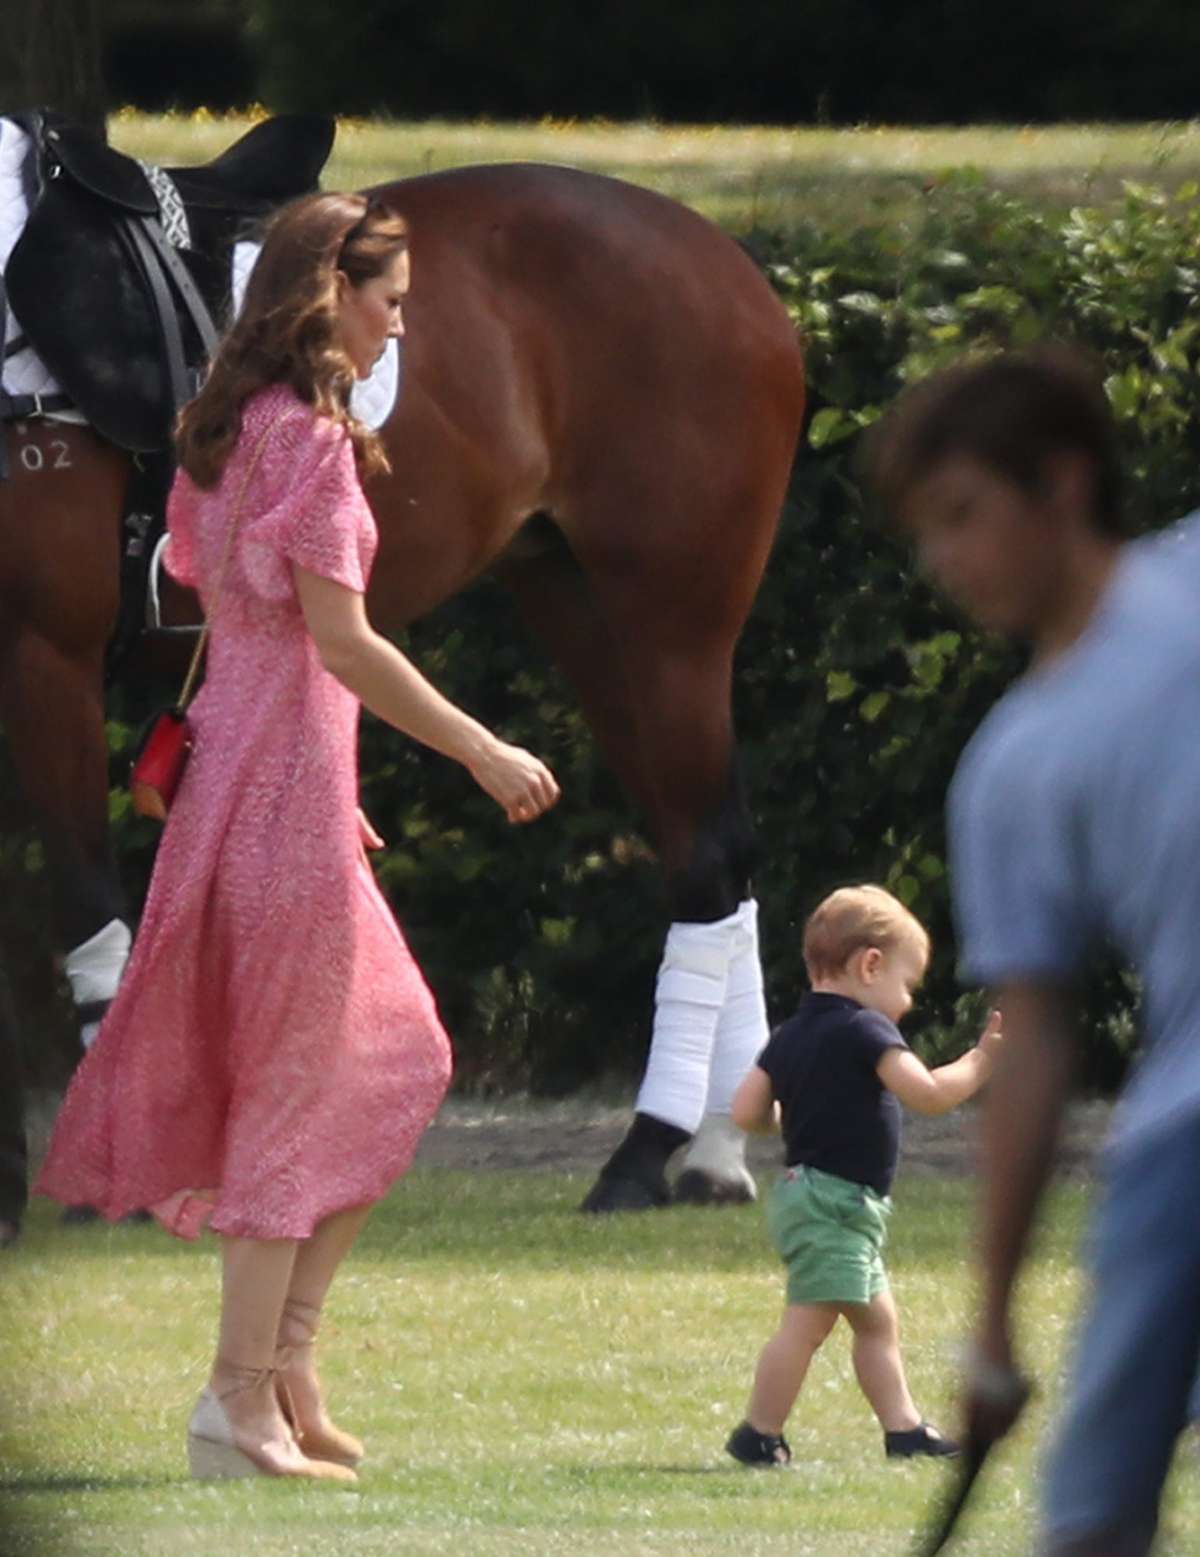 Prince Louis Had an Excellent Time Hamming it Up At the Polo Match